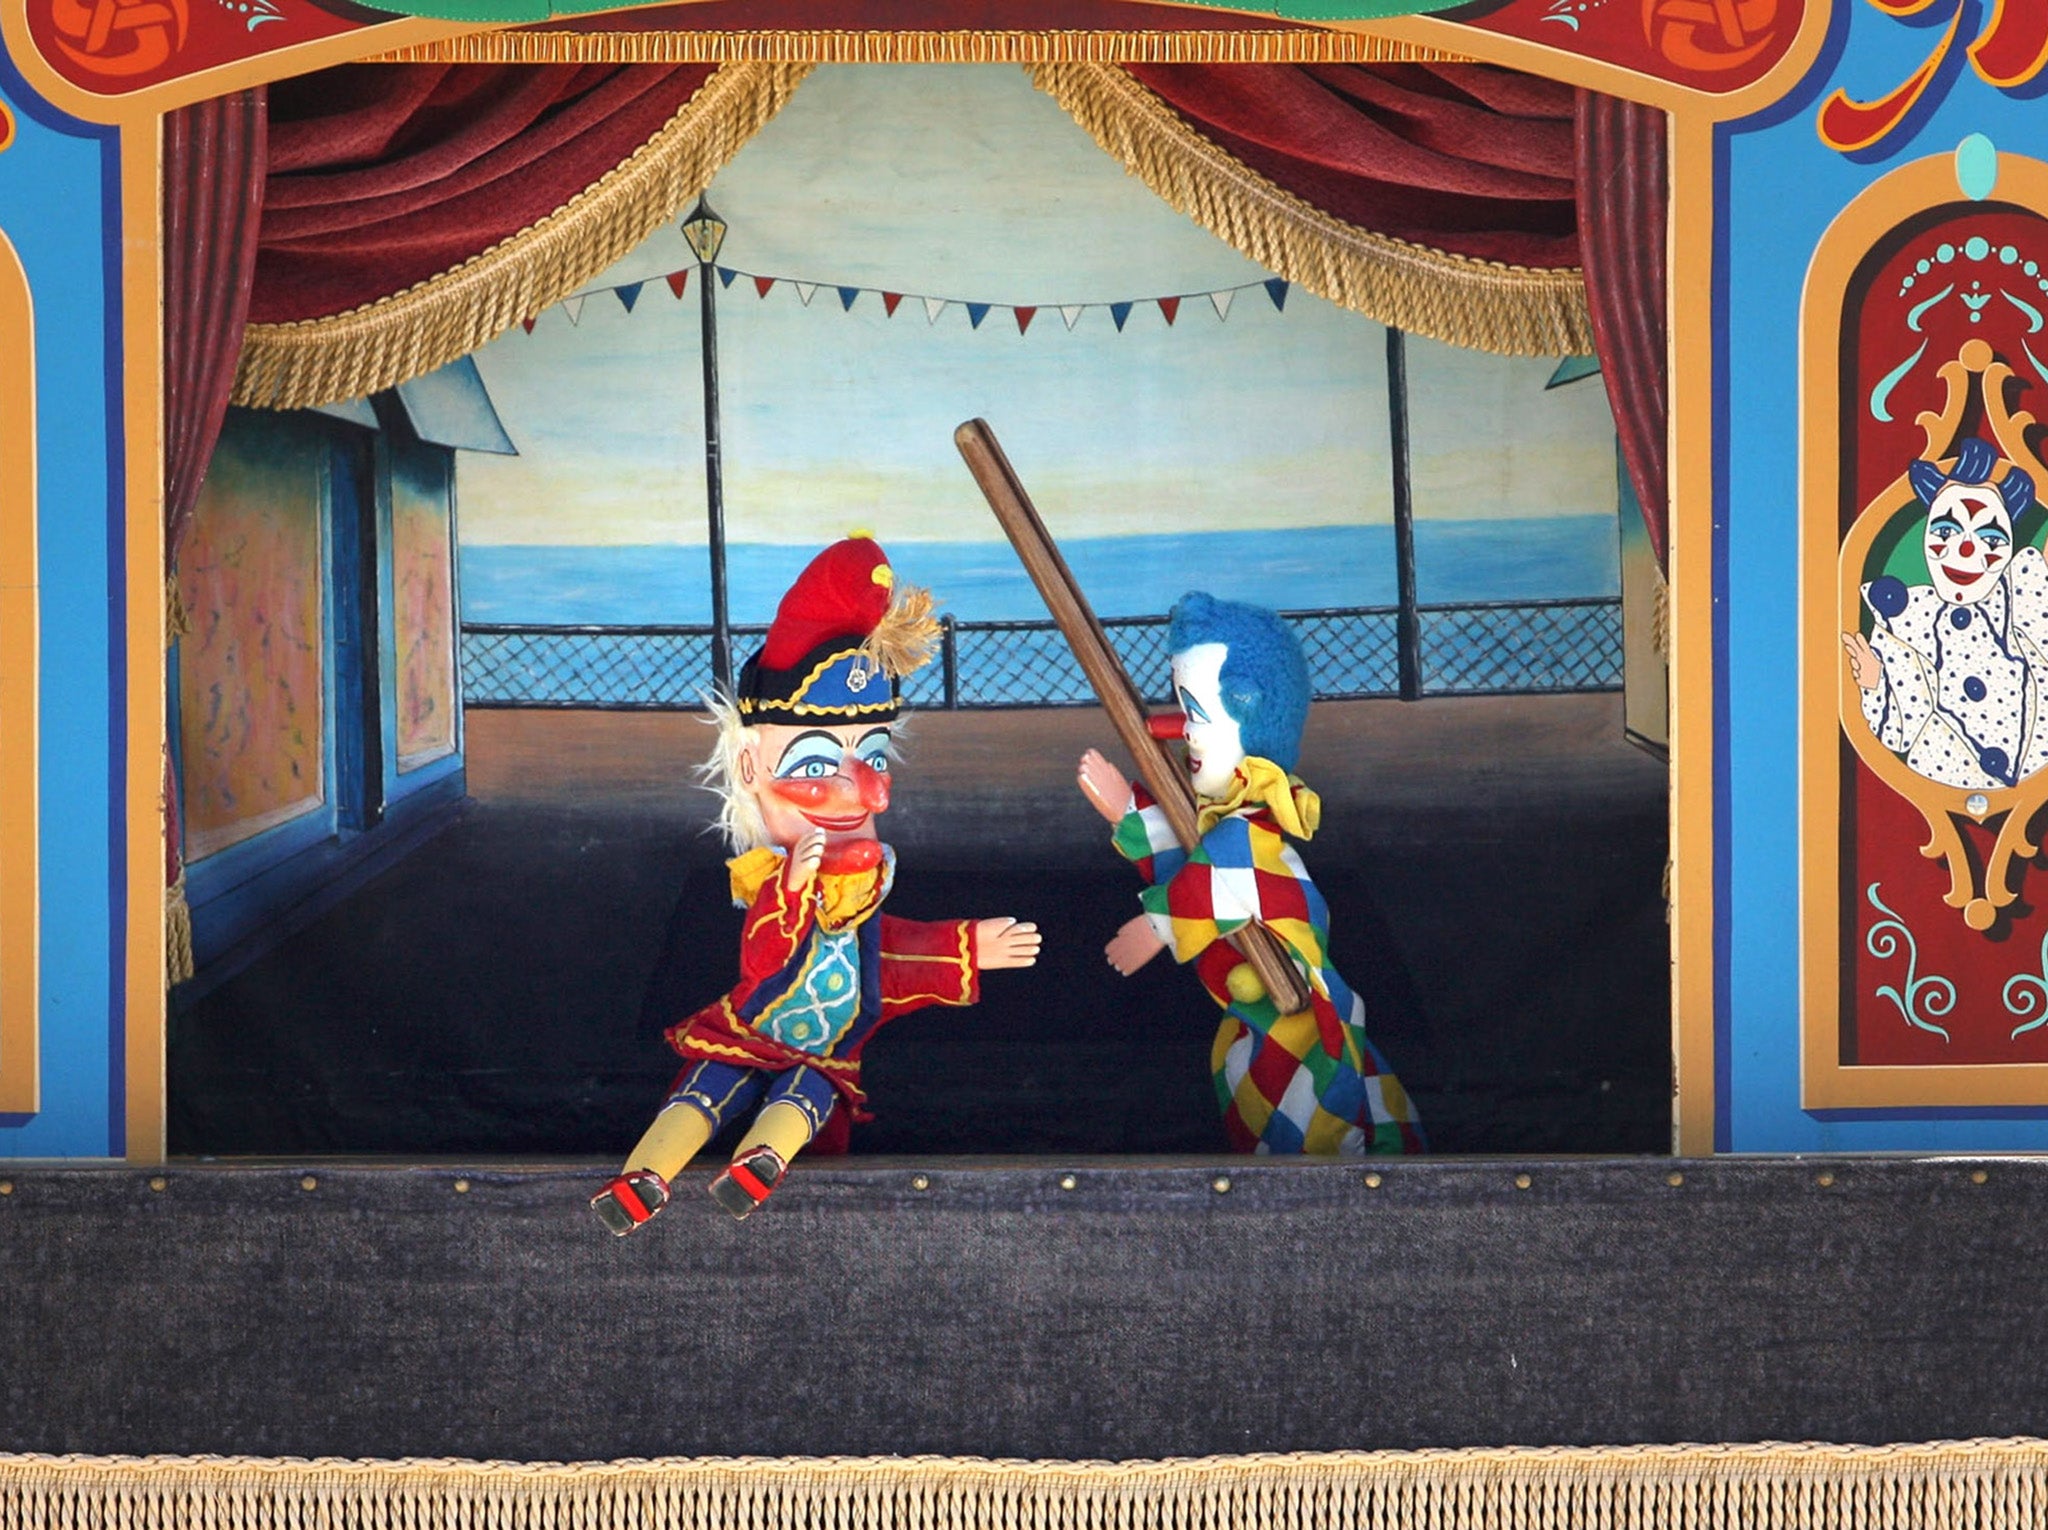 School cancels Punch and Judy show over fears it glorifies domestic violence